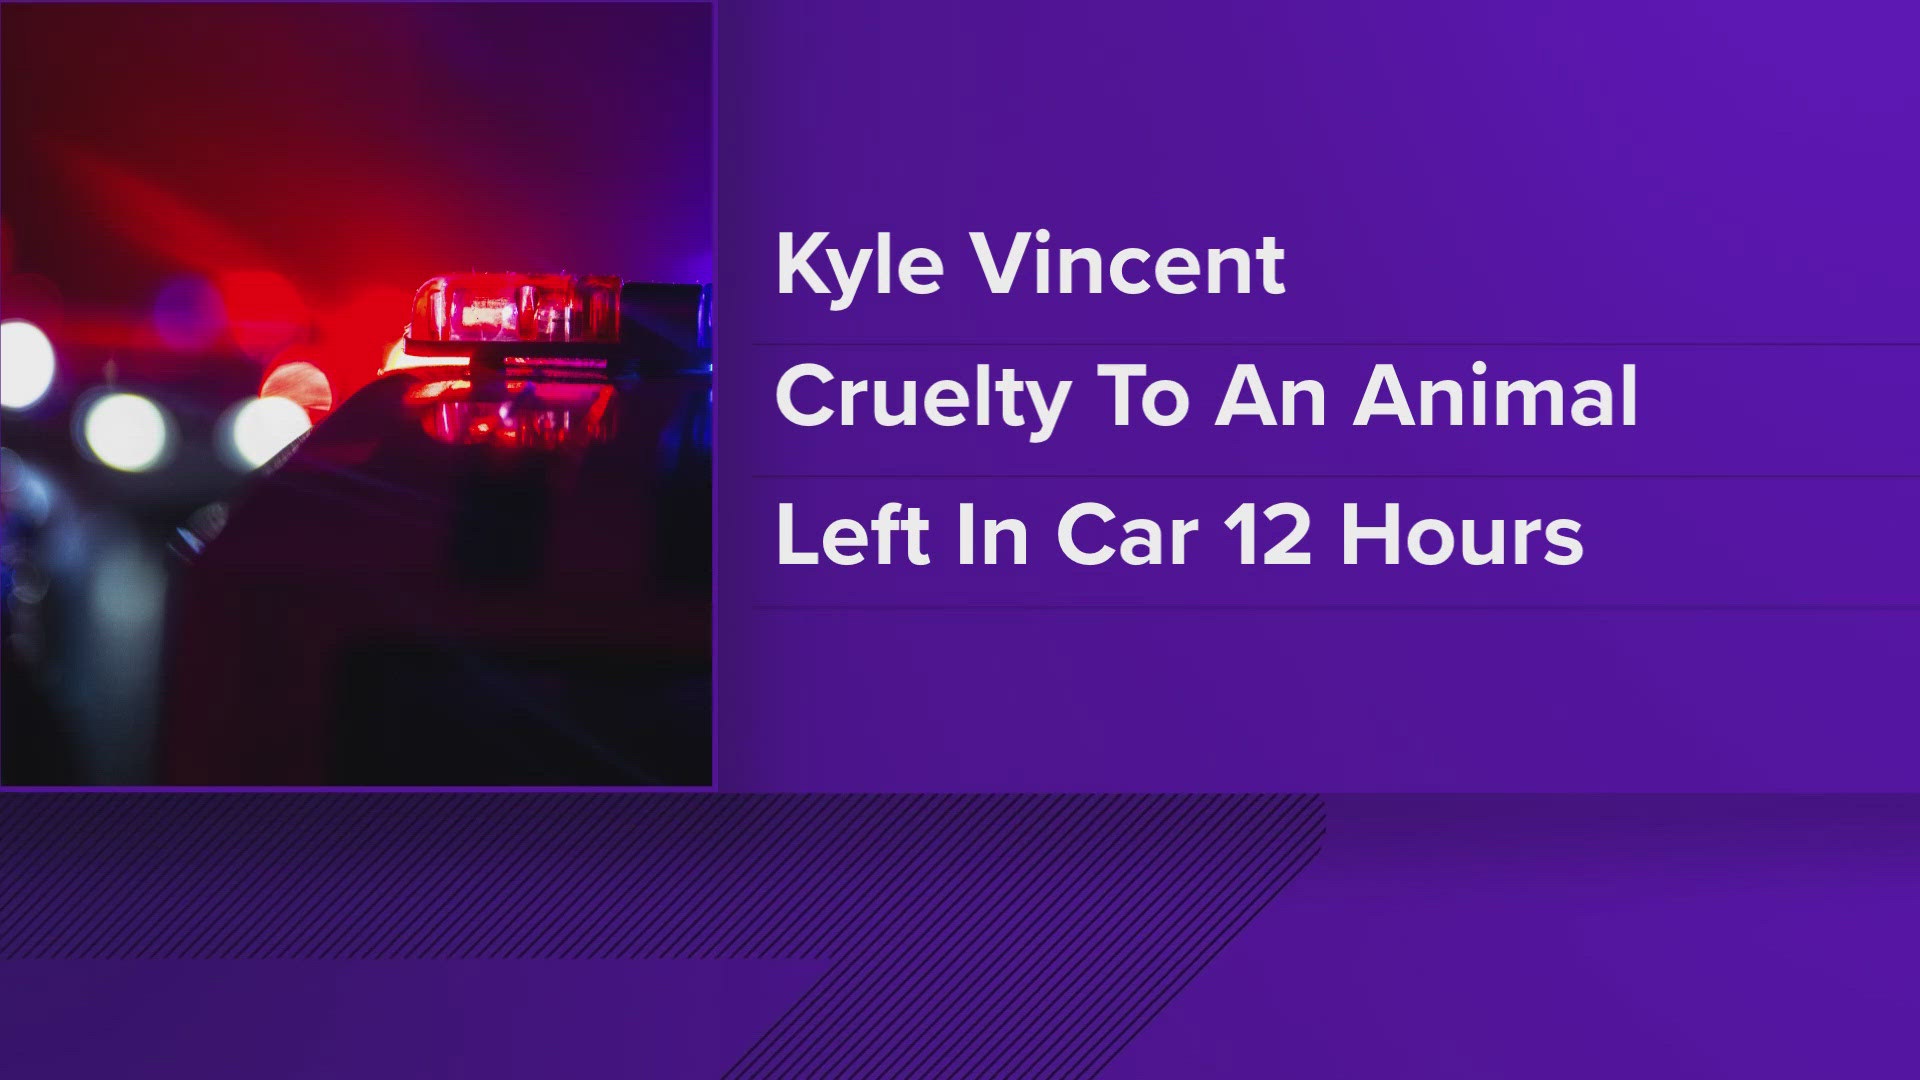 Court documents say Kyle Vincent gave conflicting stories before admitting he left K-9 Officer Zeus in his patrol car kennel for 12 hours.